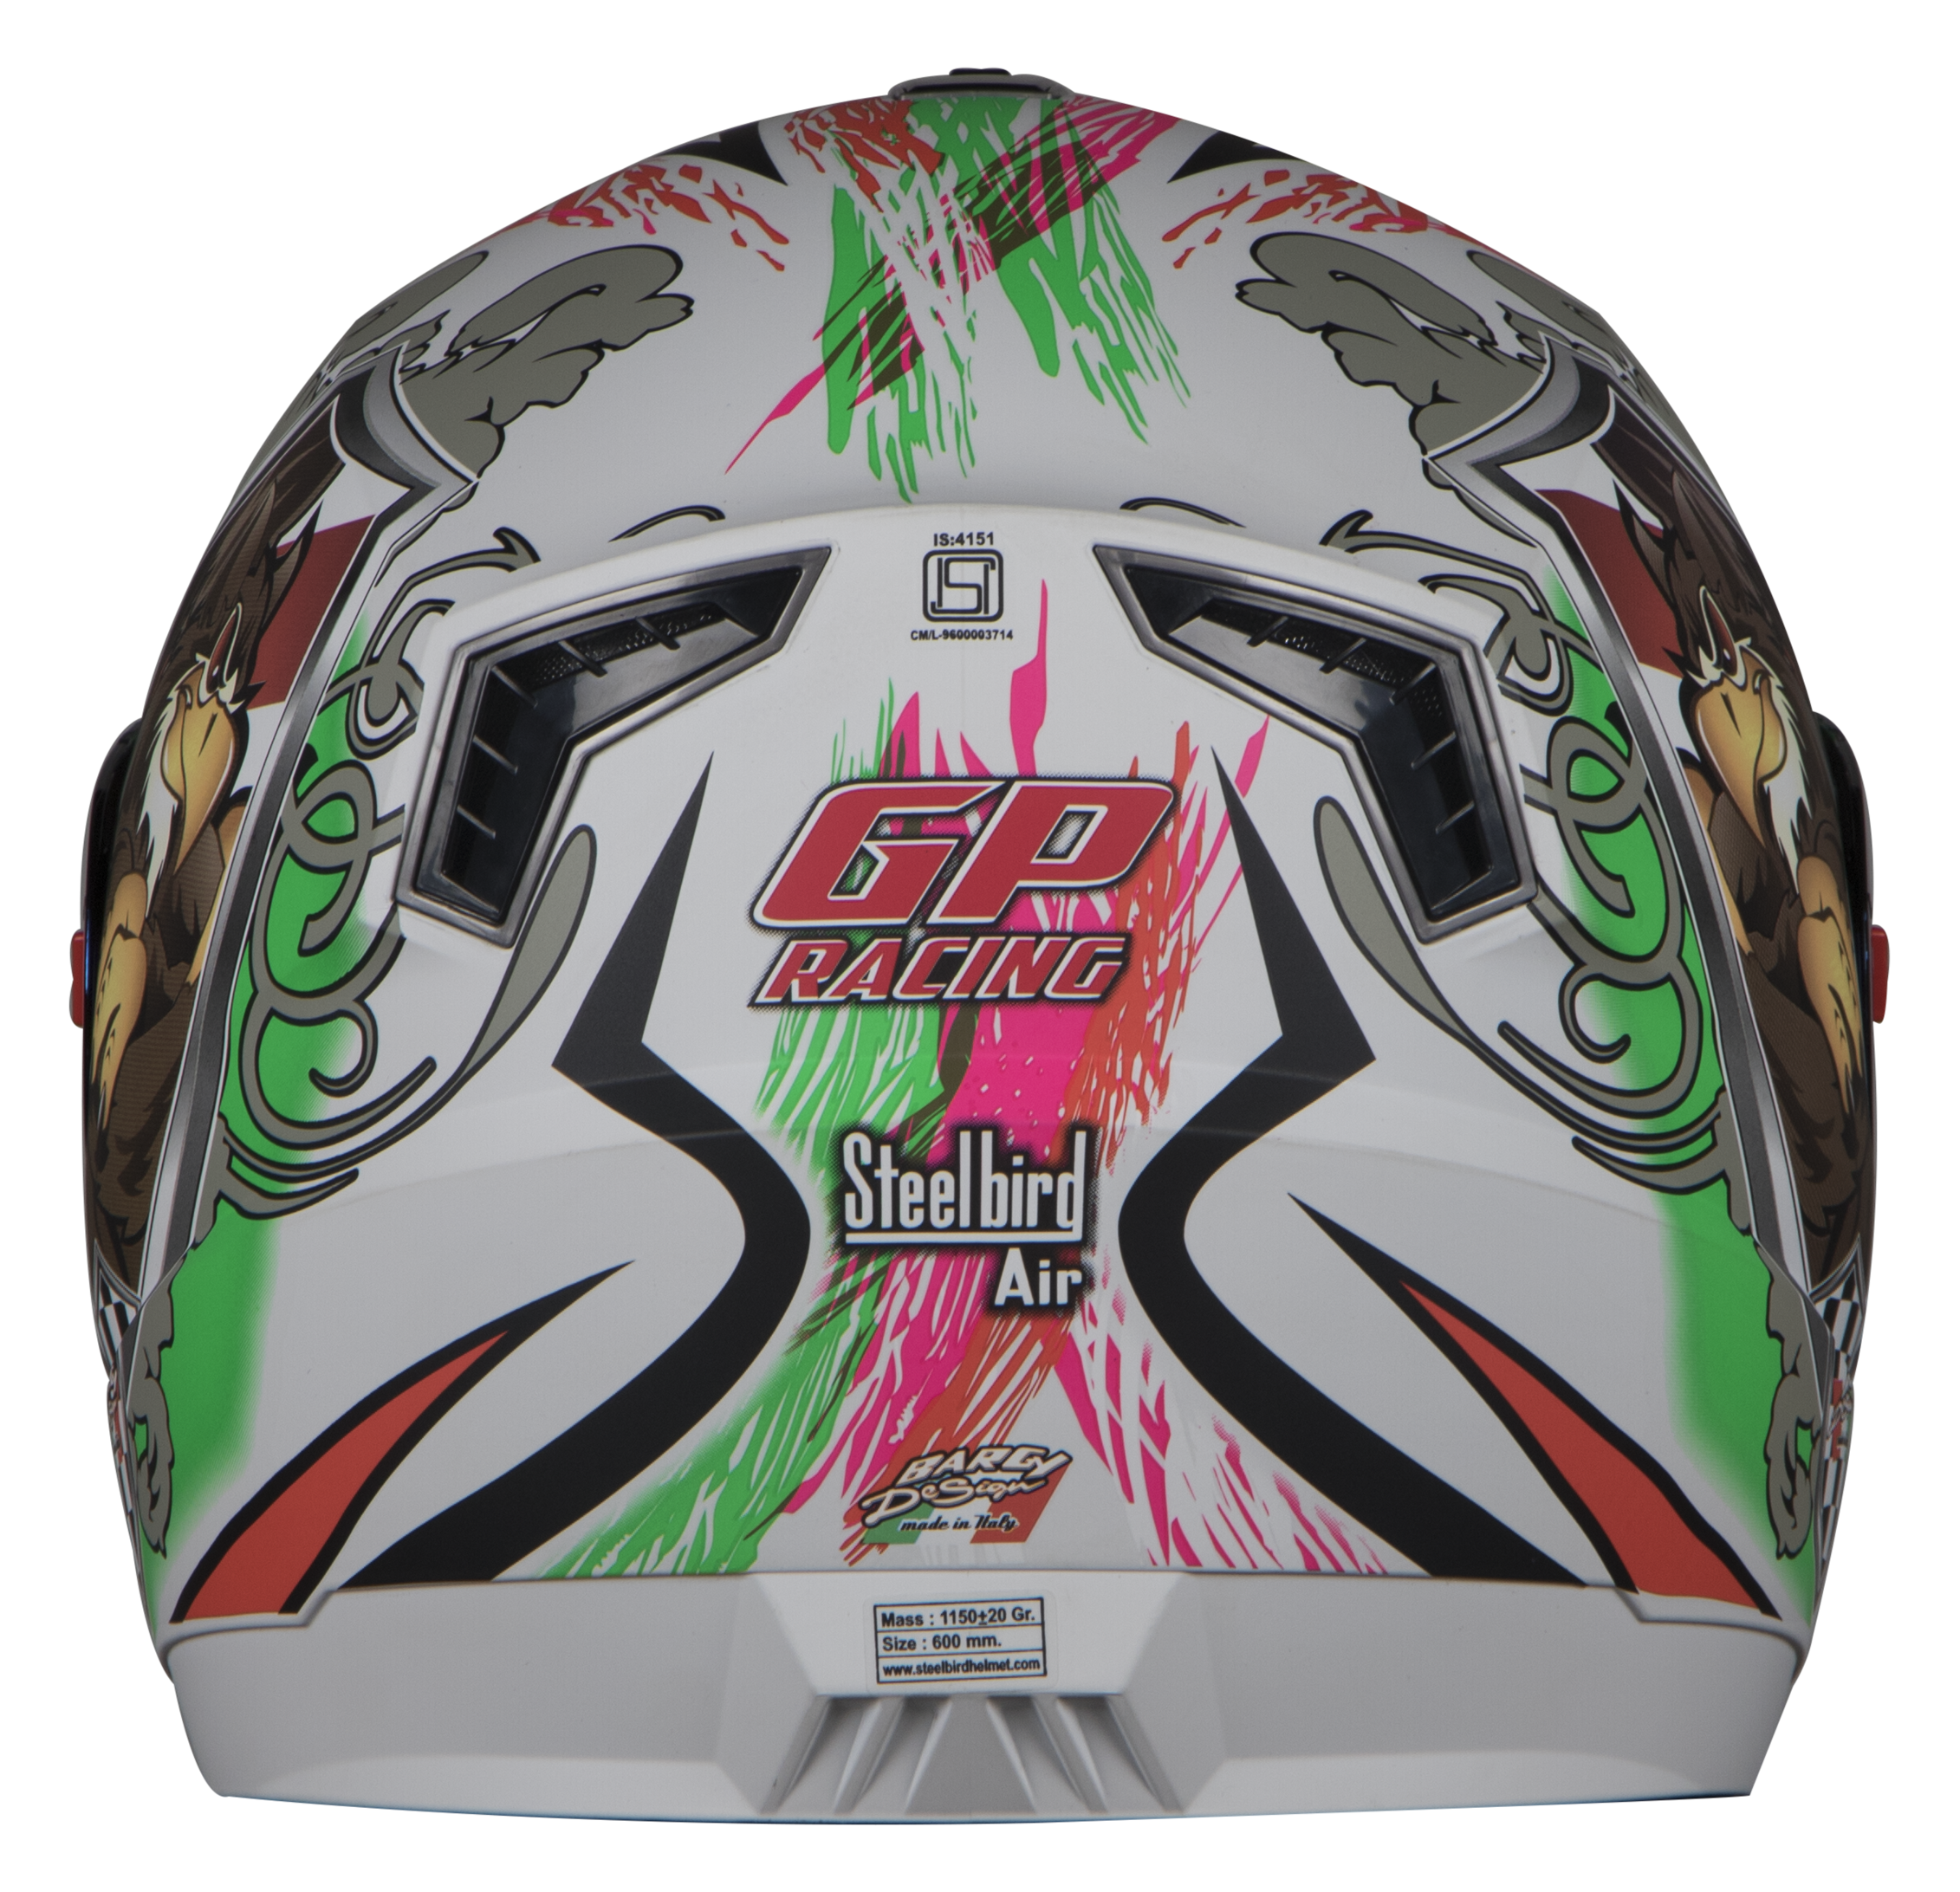 SBA-1 Griffon Mat White With Green ( Fitted With Clear Visor Extra Blue Chrome Visor Free)